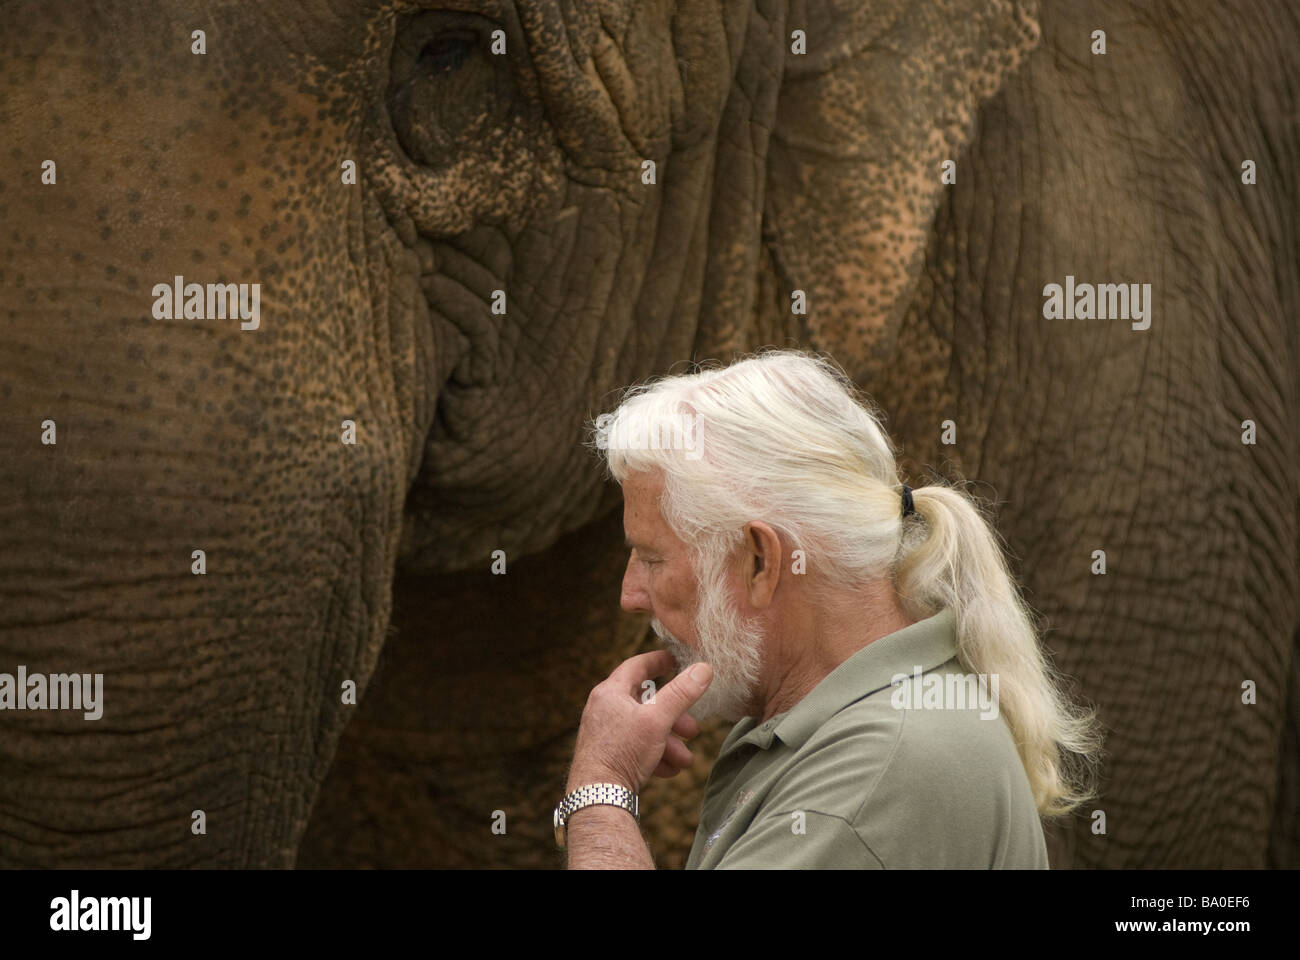 Riddle's Elephant and Wildlife Sanctuary in Greenbrier, Arkansas. Stock Photo